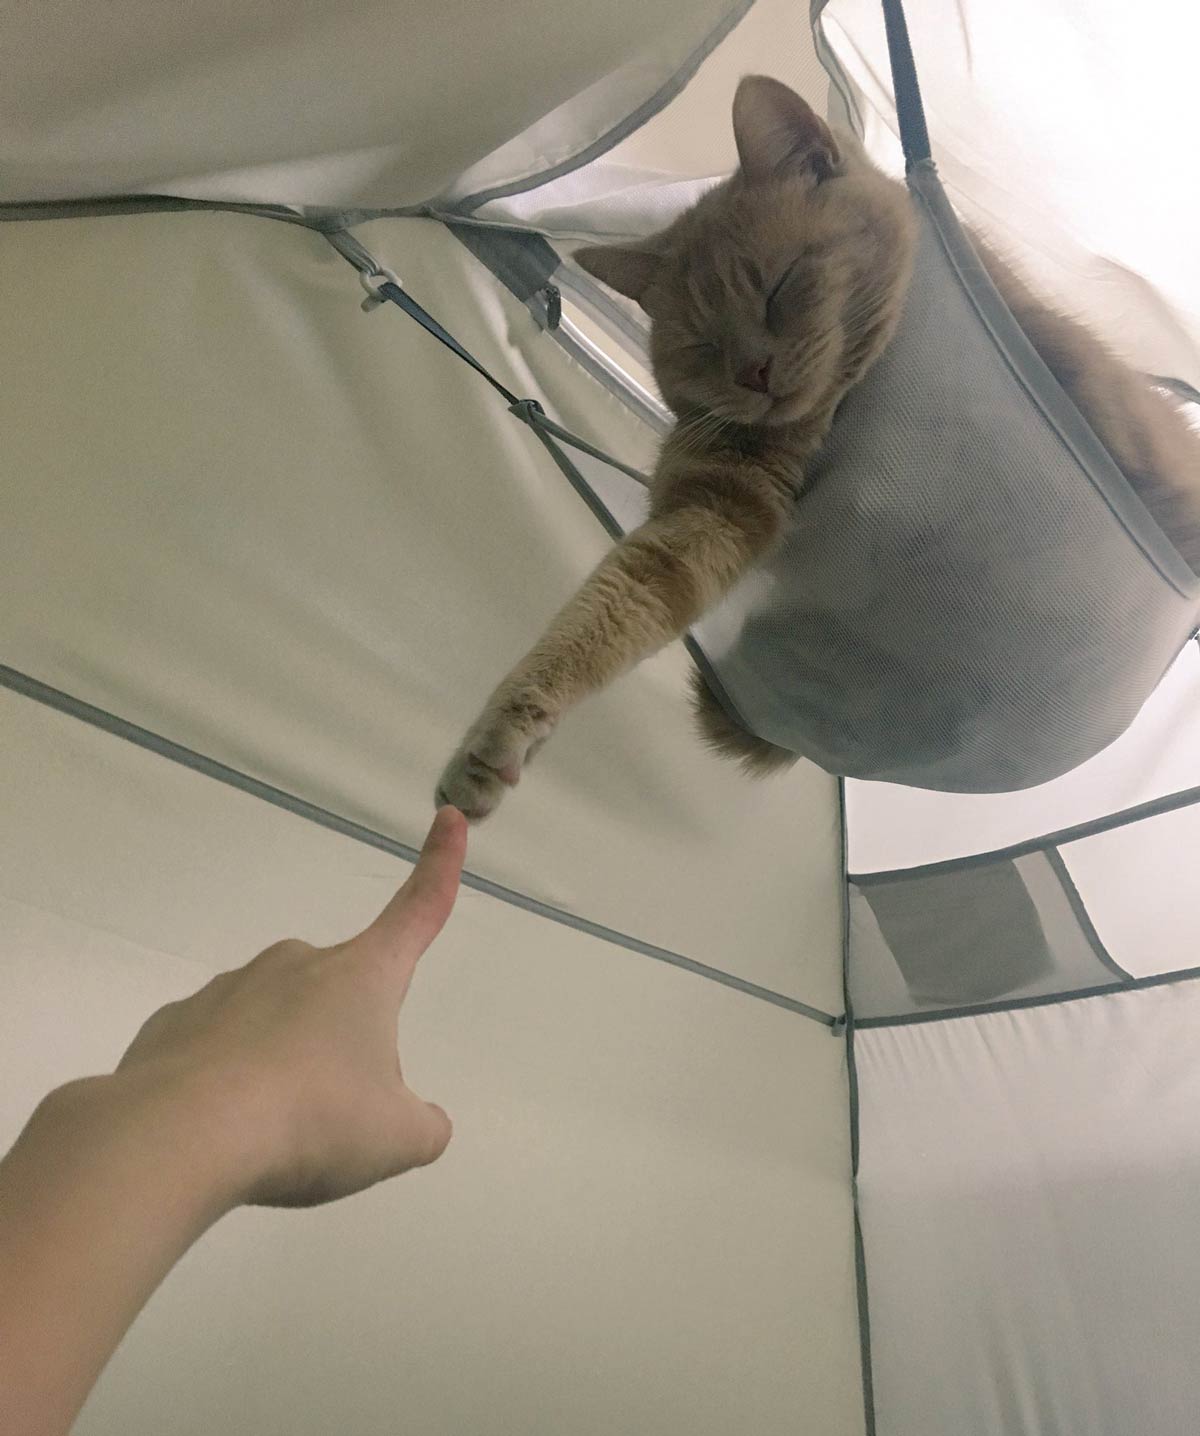 The creation of cat